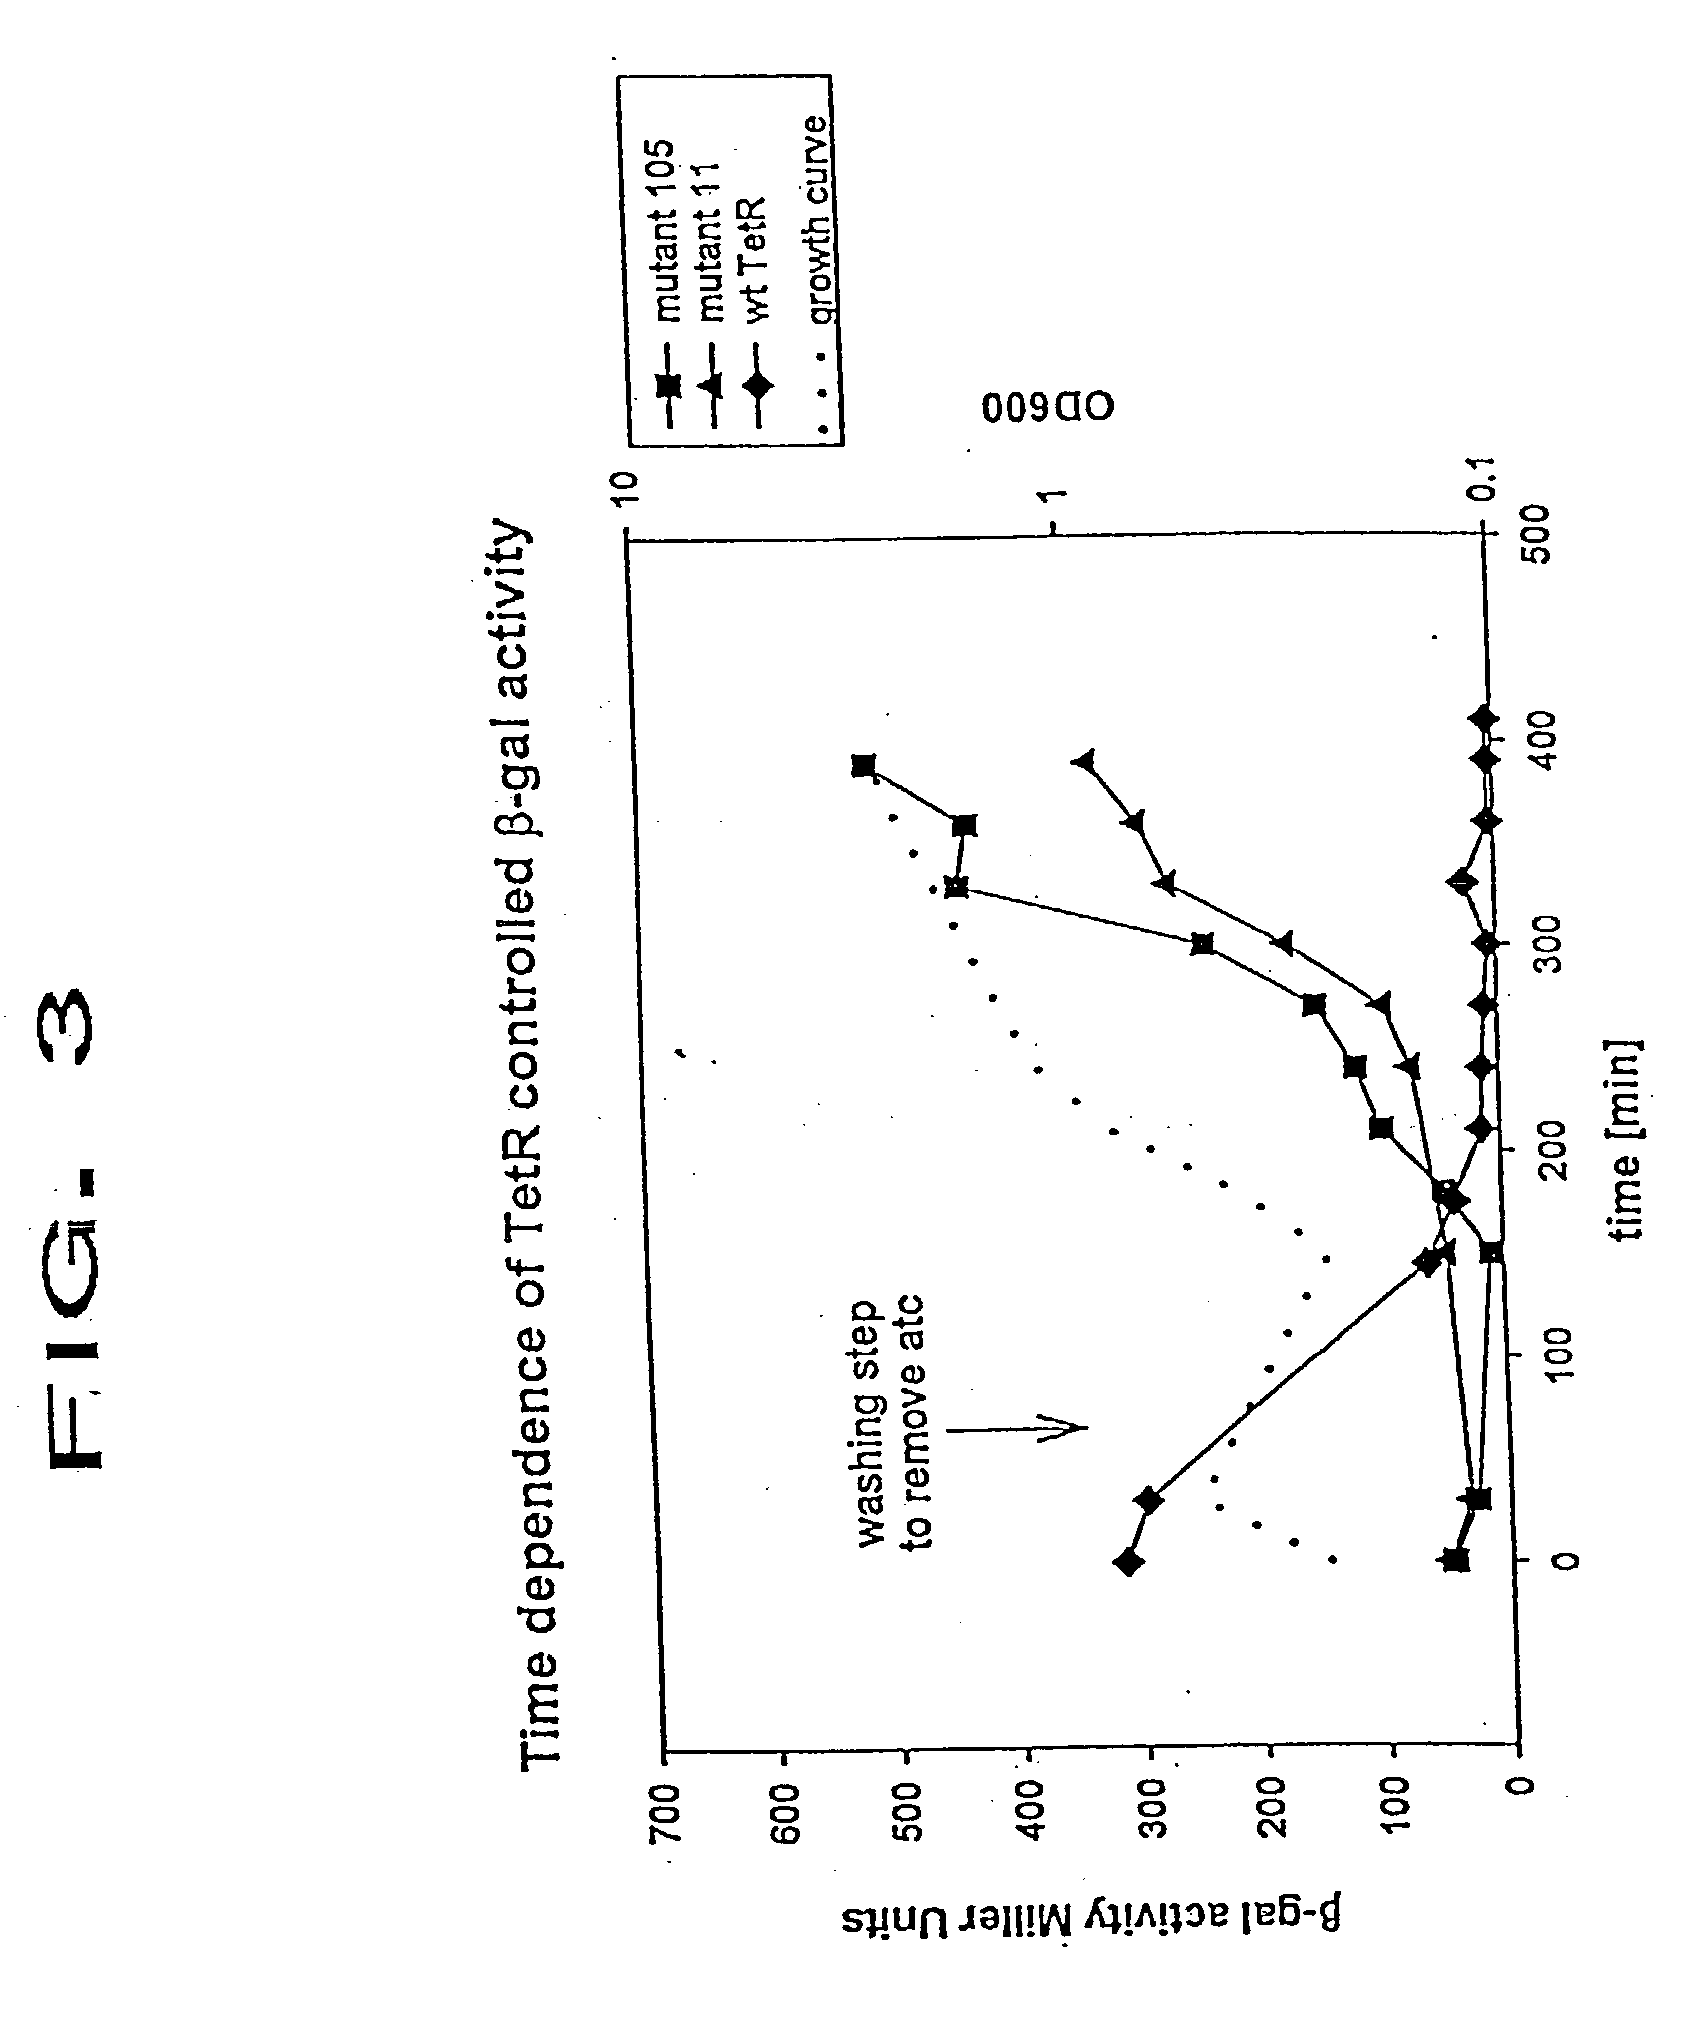 Modified tetracycline repressor protein compositions and methods of use